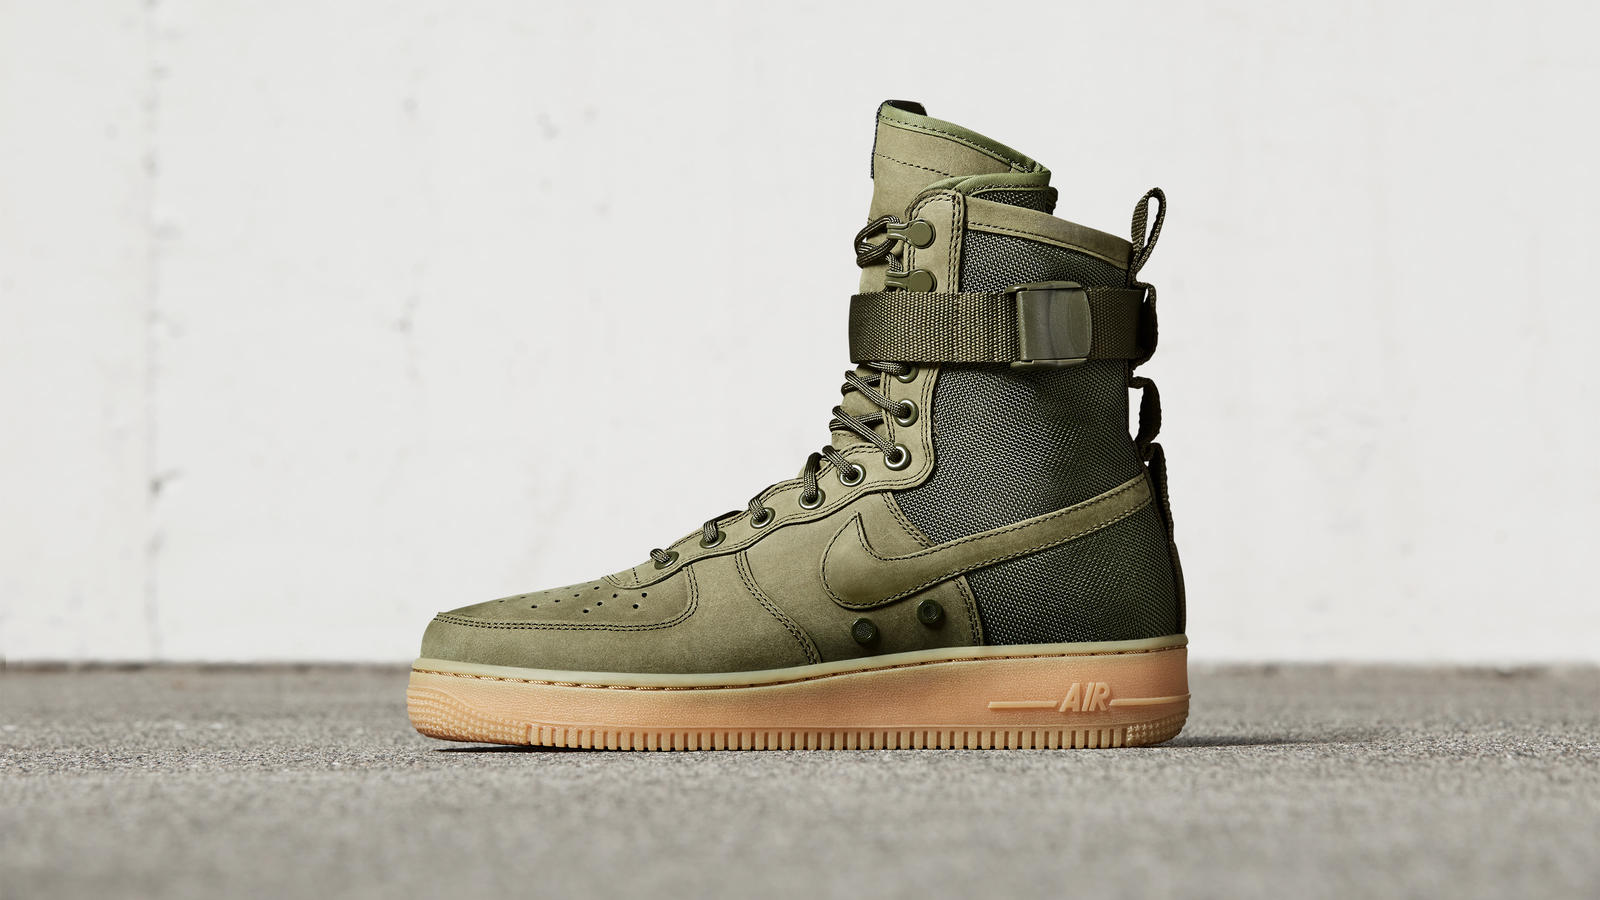 Special Field Air Force 1 